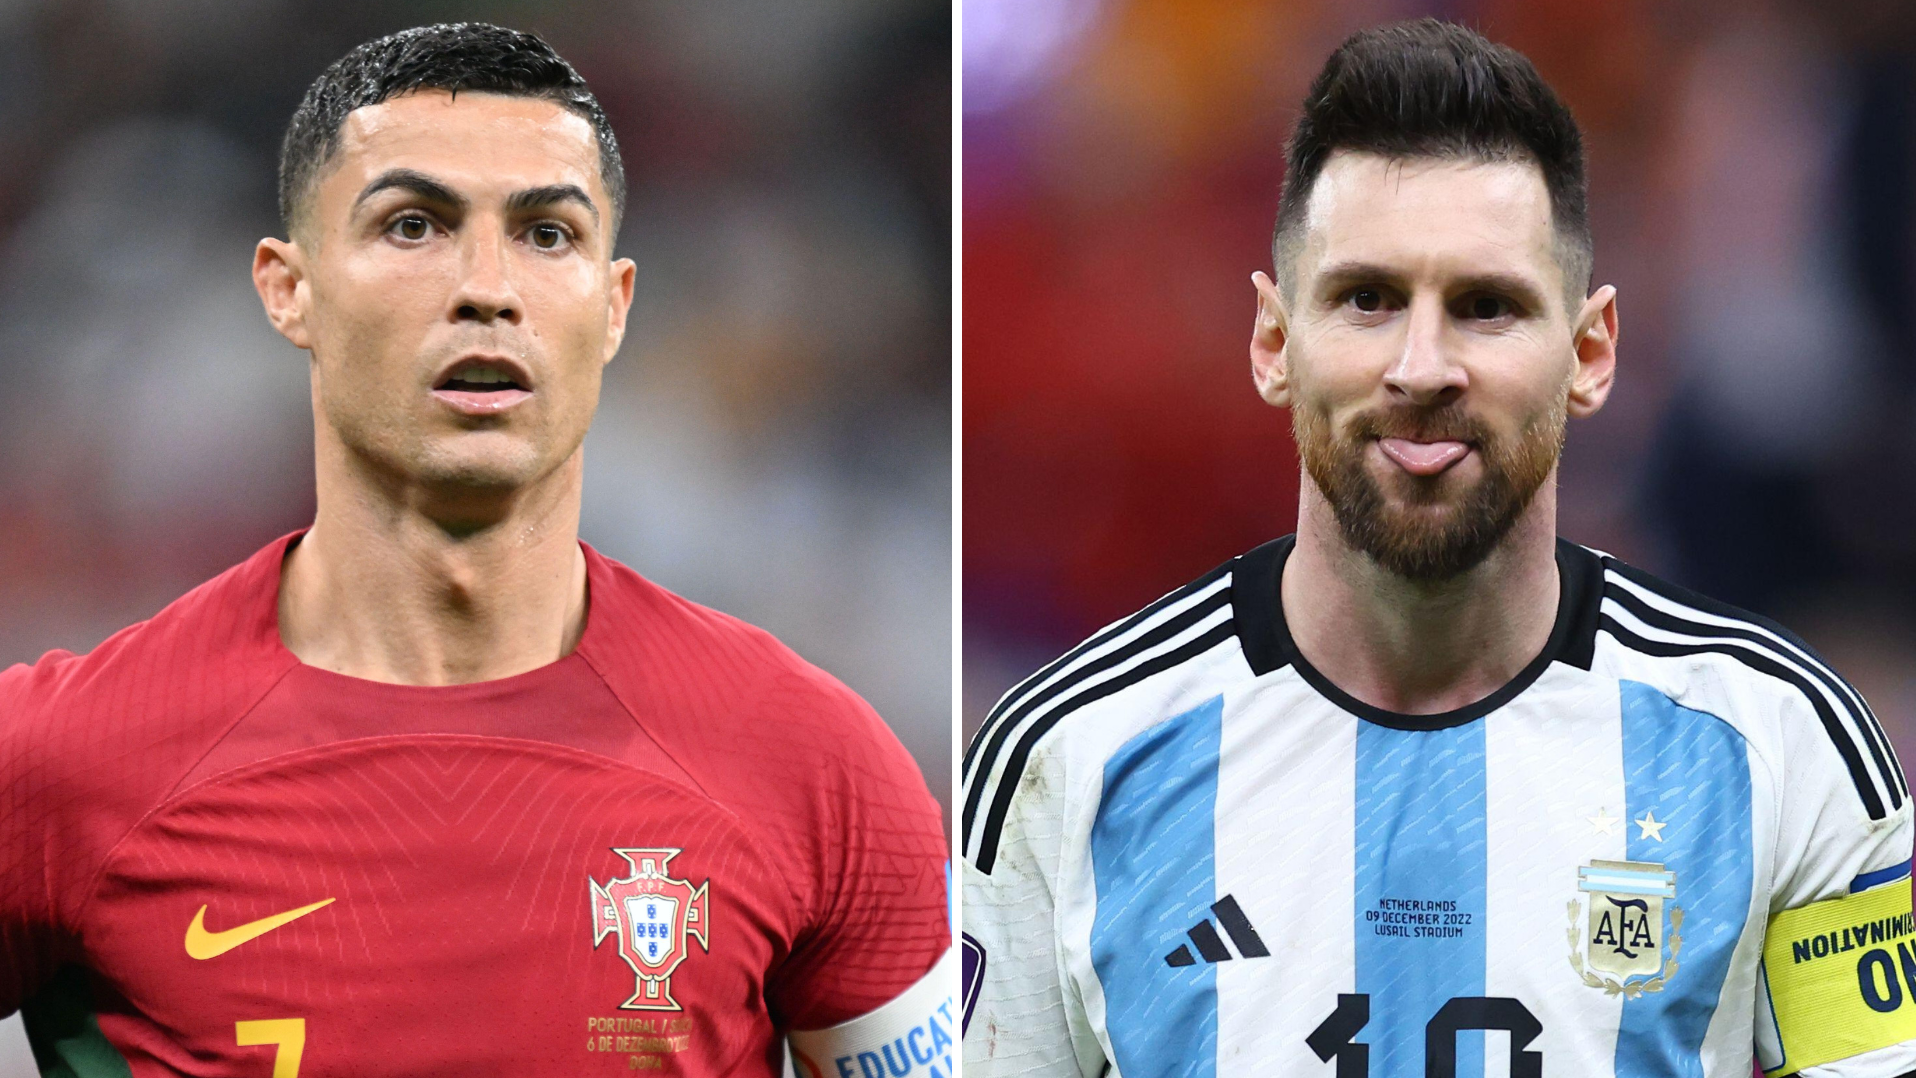 The Ballon d'Or shortlist finally settles the Cristiano Ronaldo vs Lionel  Messi GOAT debate once and for all